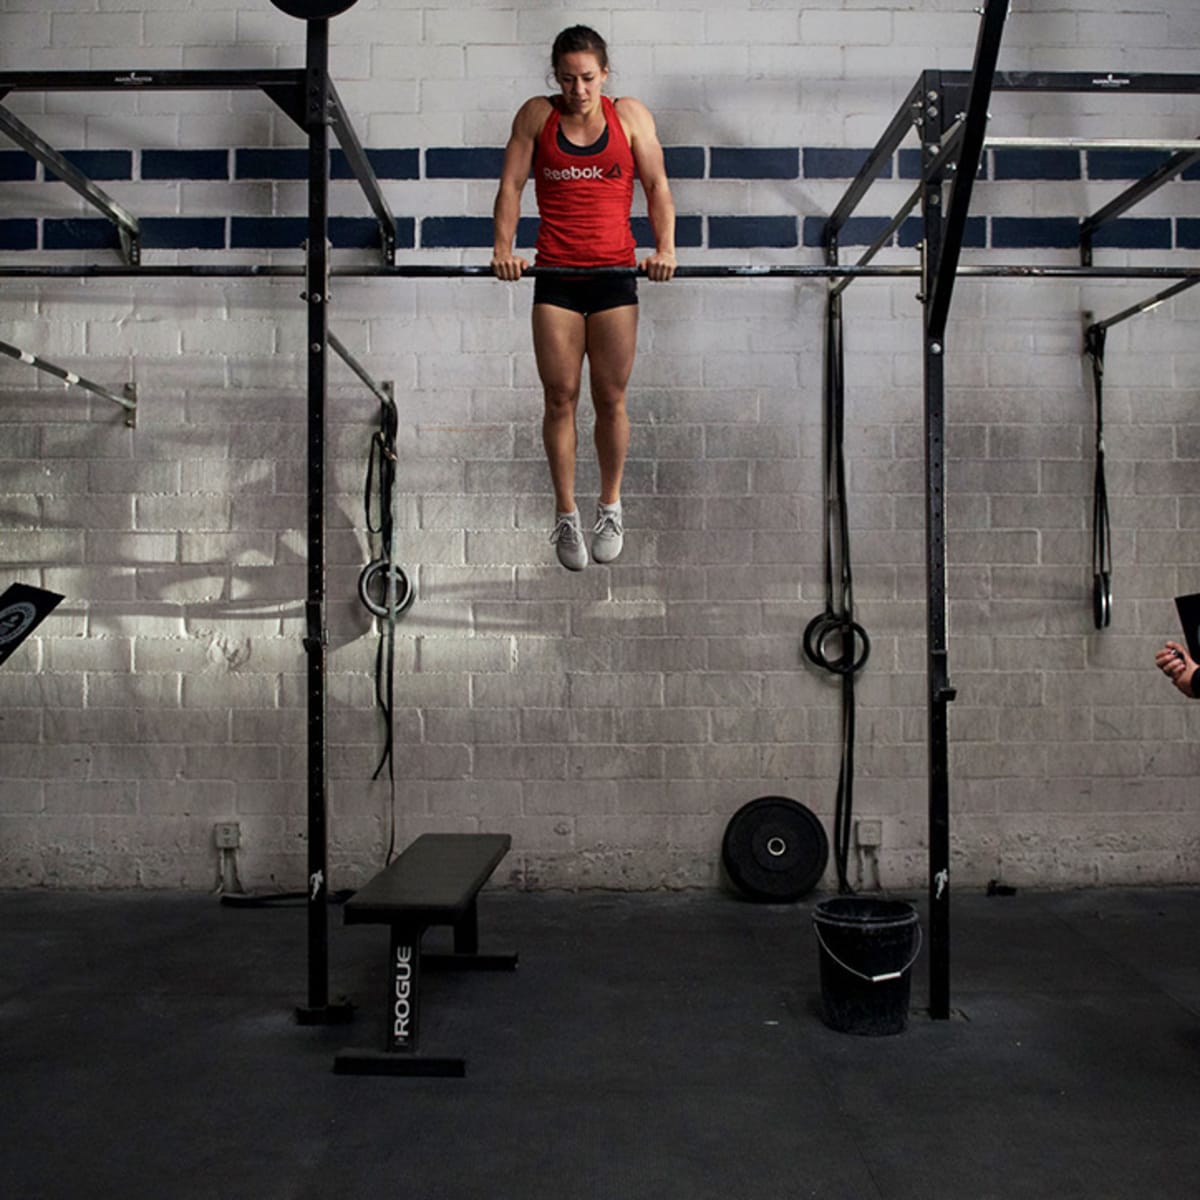 CrossFit athletes 44 records in Reebok - Sports Illustrated